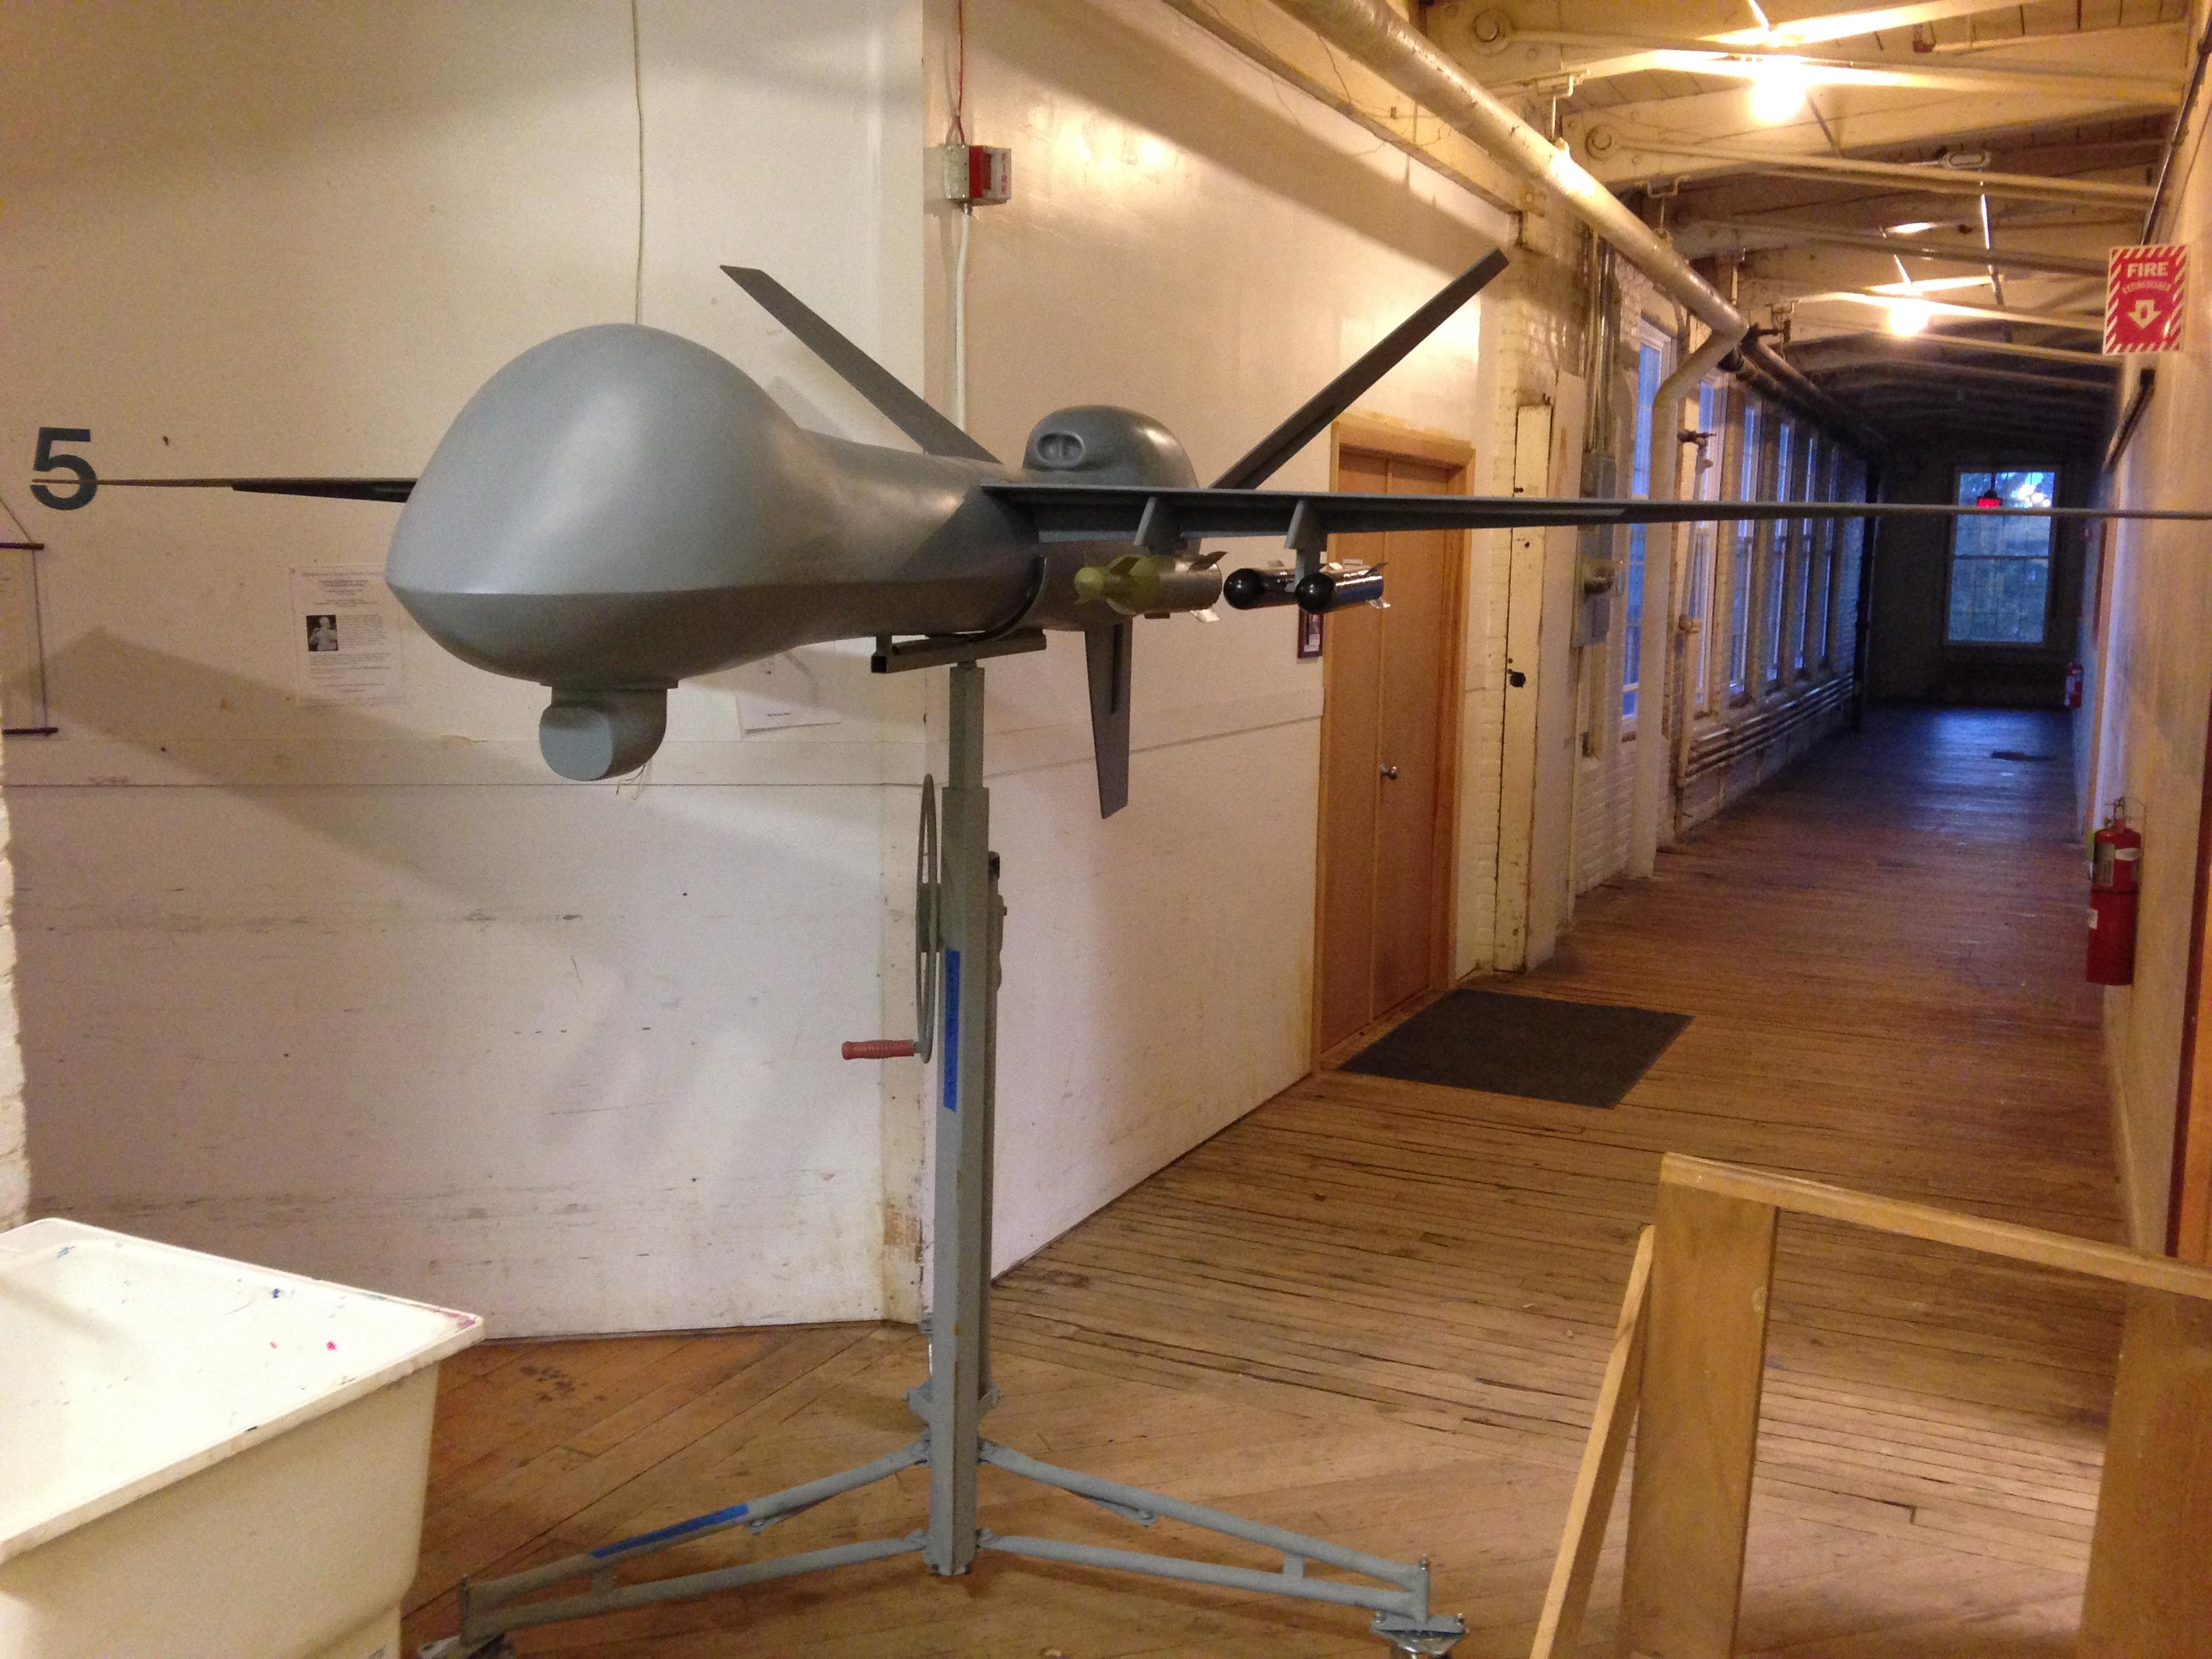 Drone model used for Amnesty's "Game of Drones" tour (Photo Credit: Amnesty International USA).